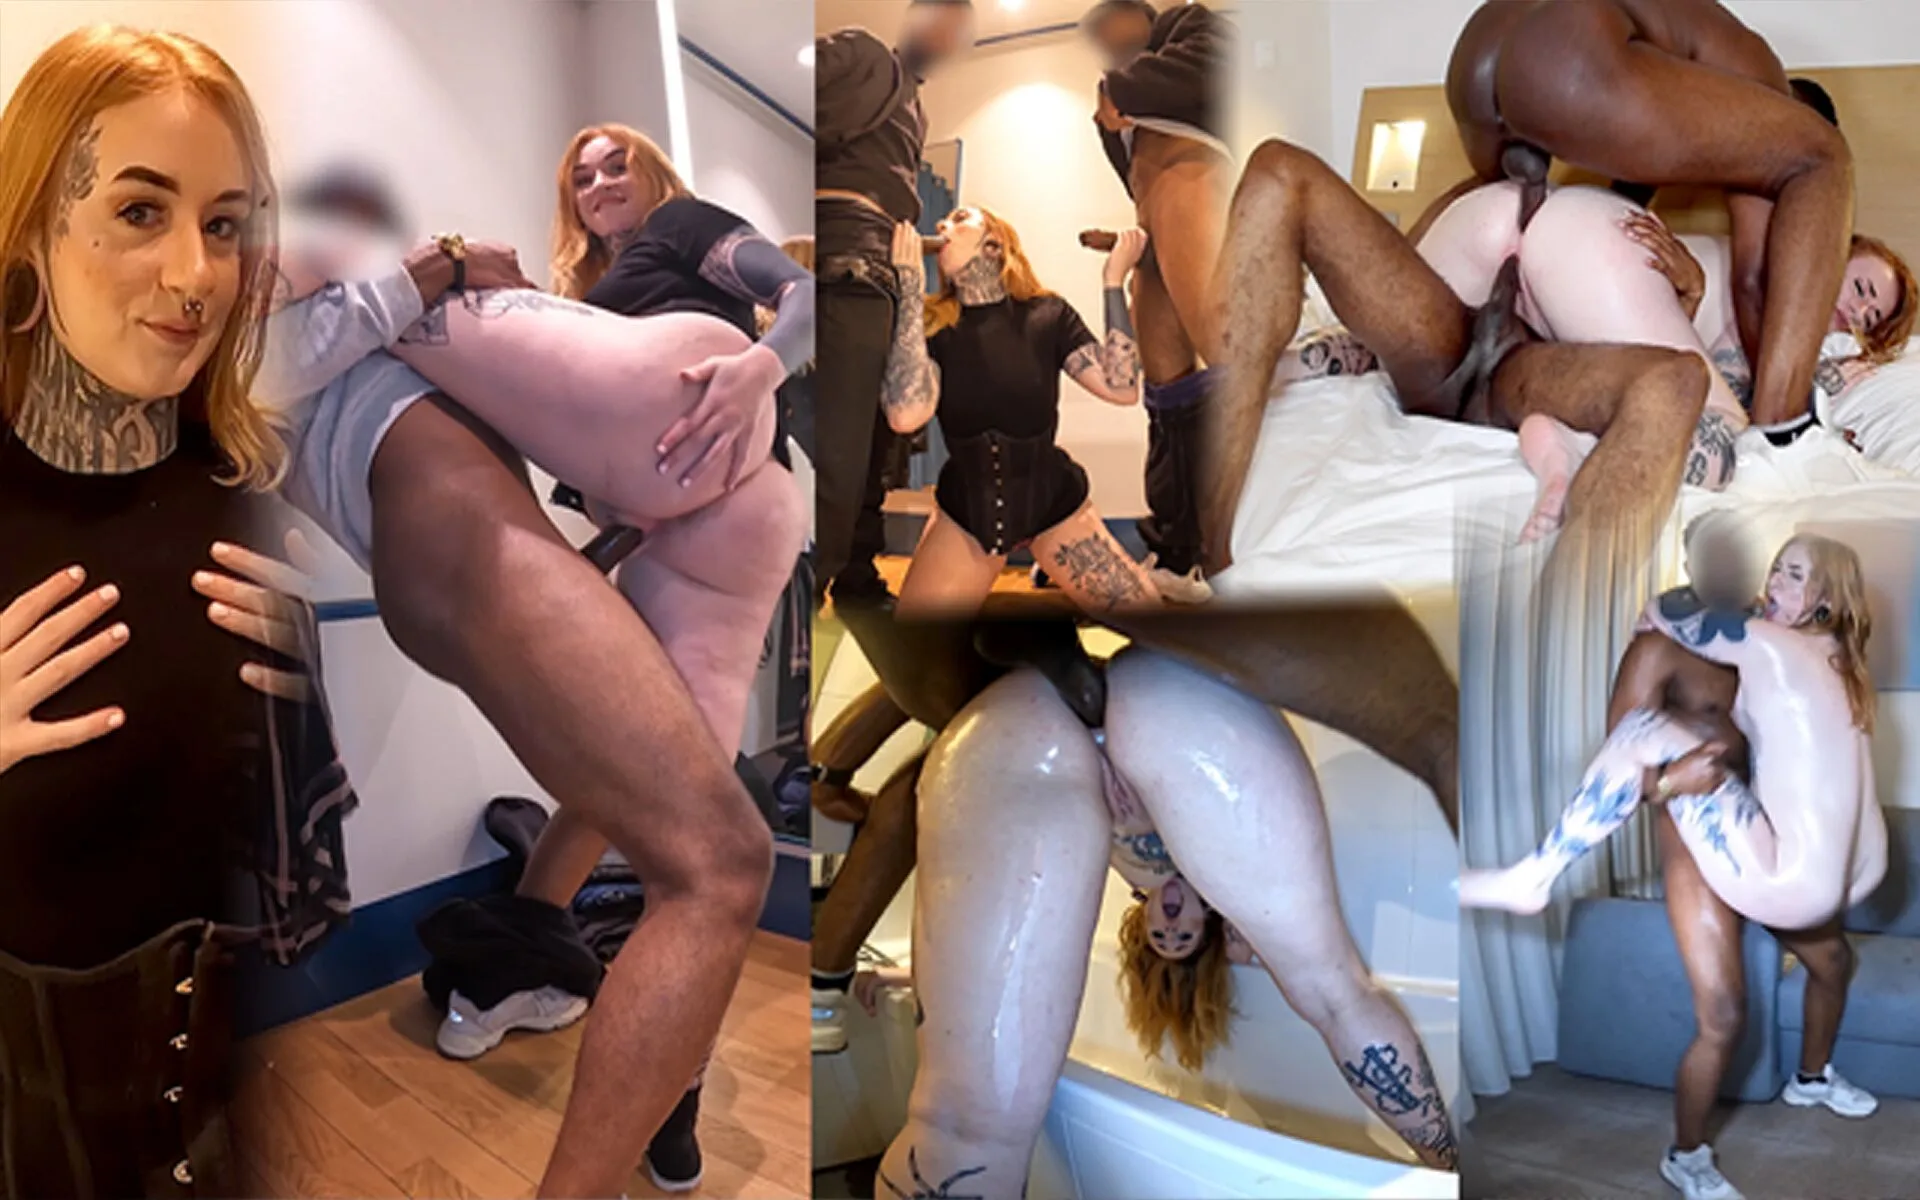 Big Ass British Student Gets Anal Fucked Hard in Fitting Room and Hotel Corridor by 2 Strangers!!! by Reels plans Faphouse pic